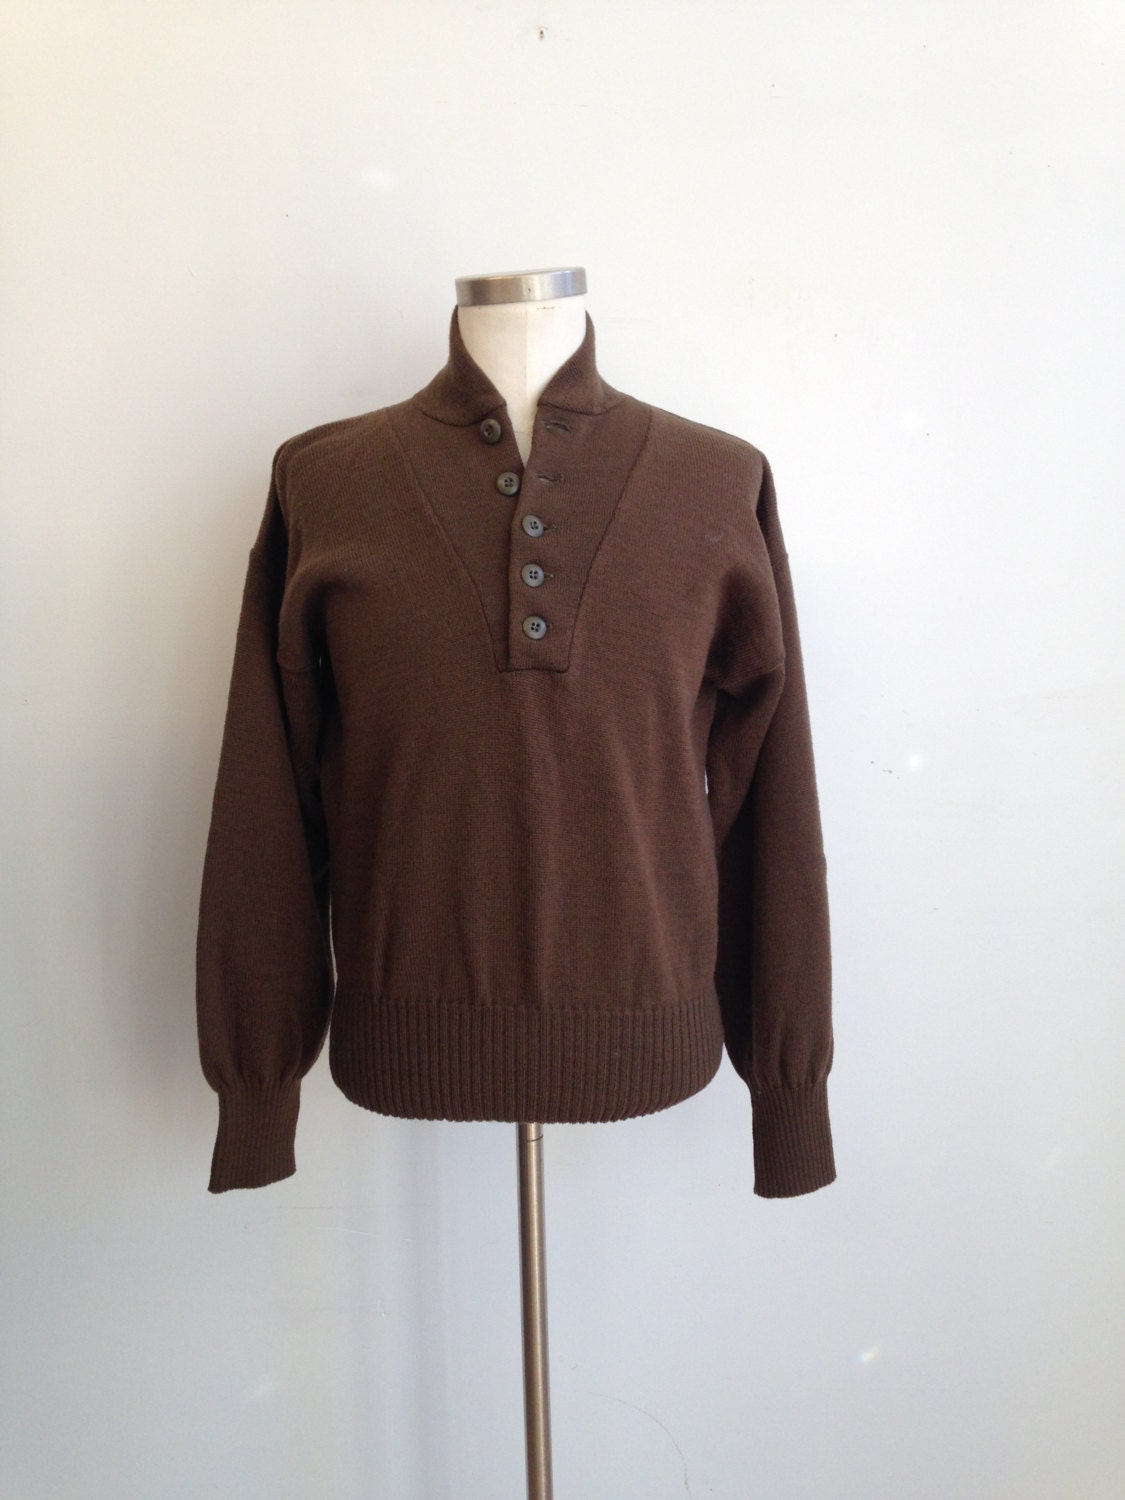 Vintage Military Henley Sweater/ Button Up Army Sweater/Drab